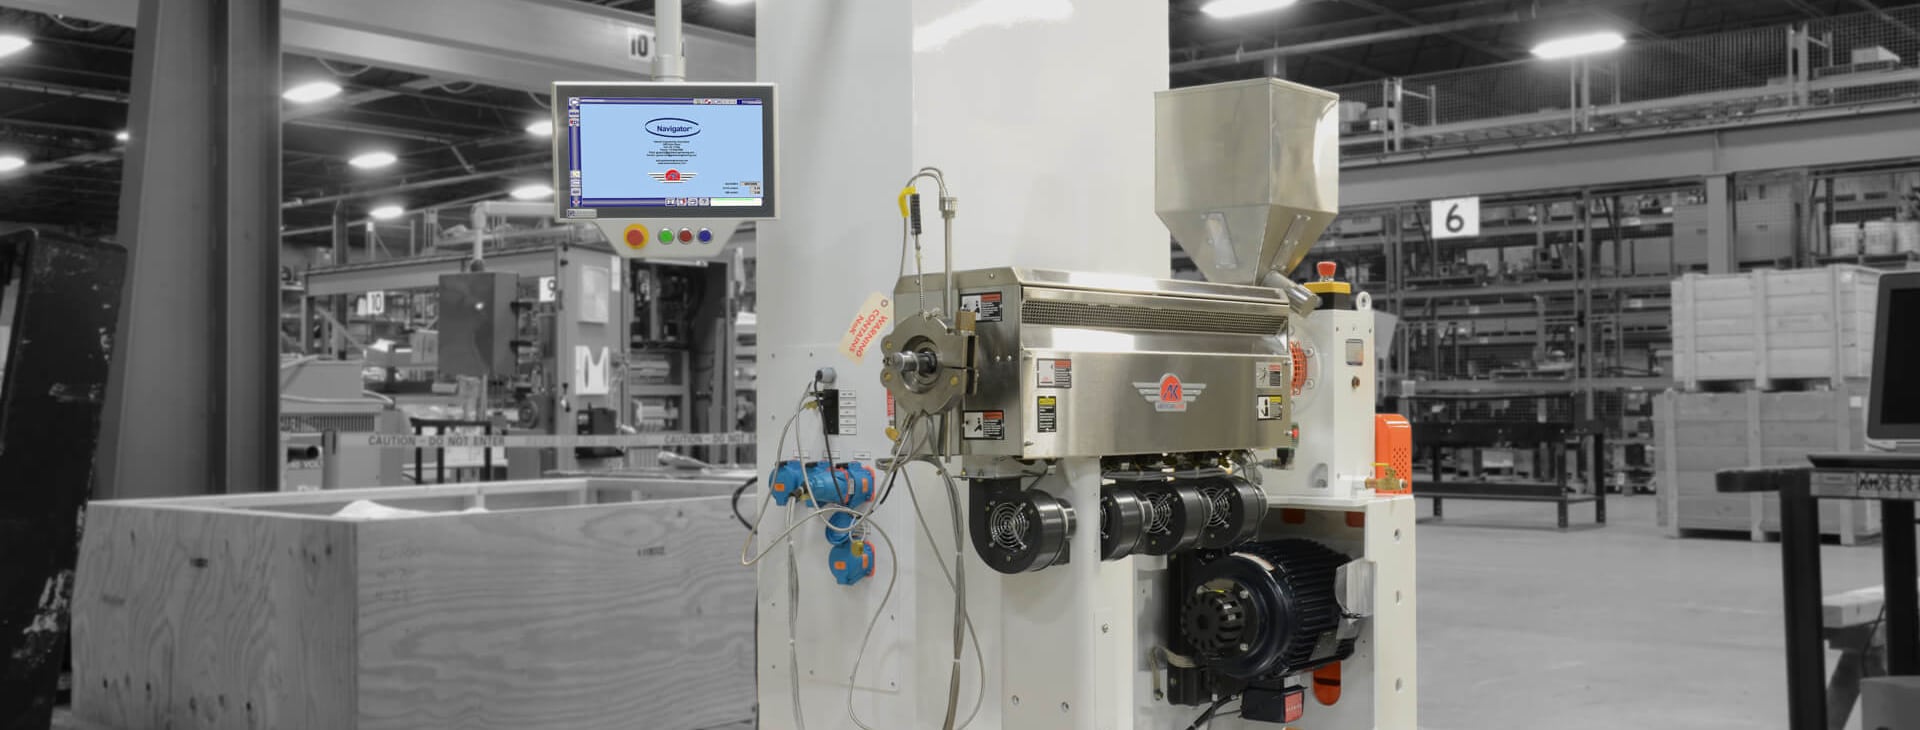 XC navigator on an extrusion machine showing the easy controls